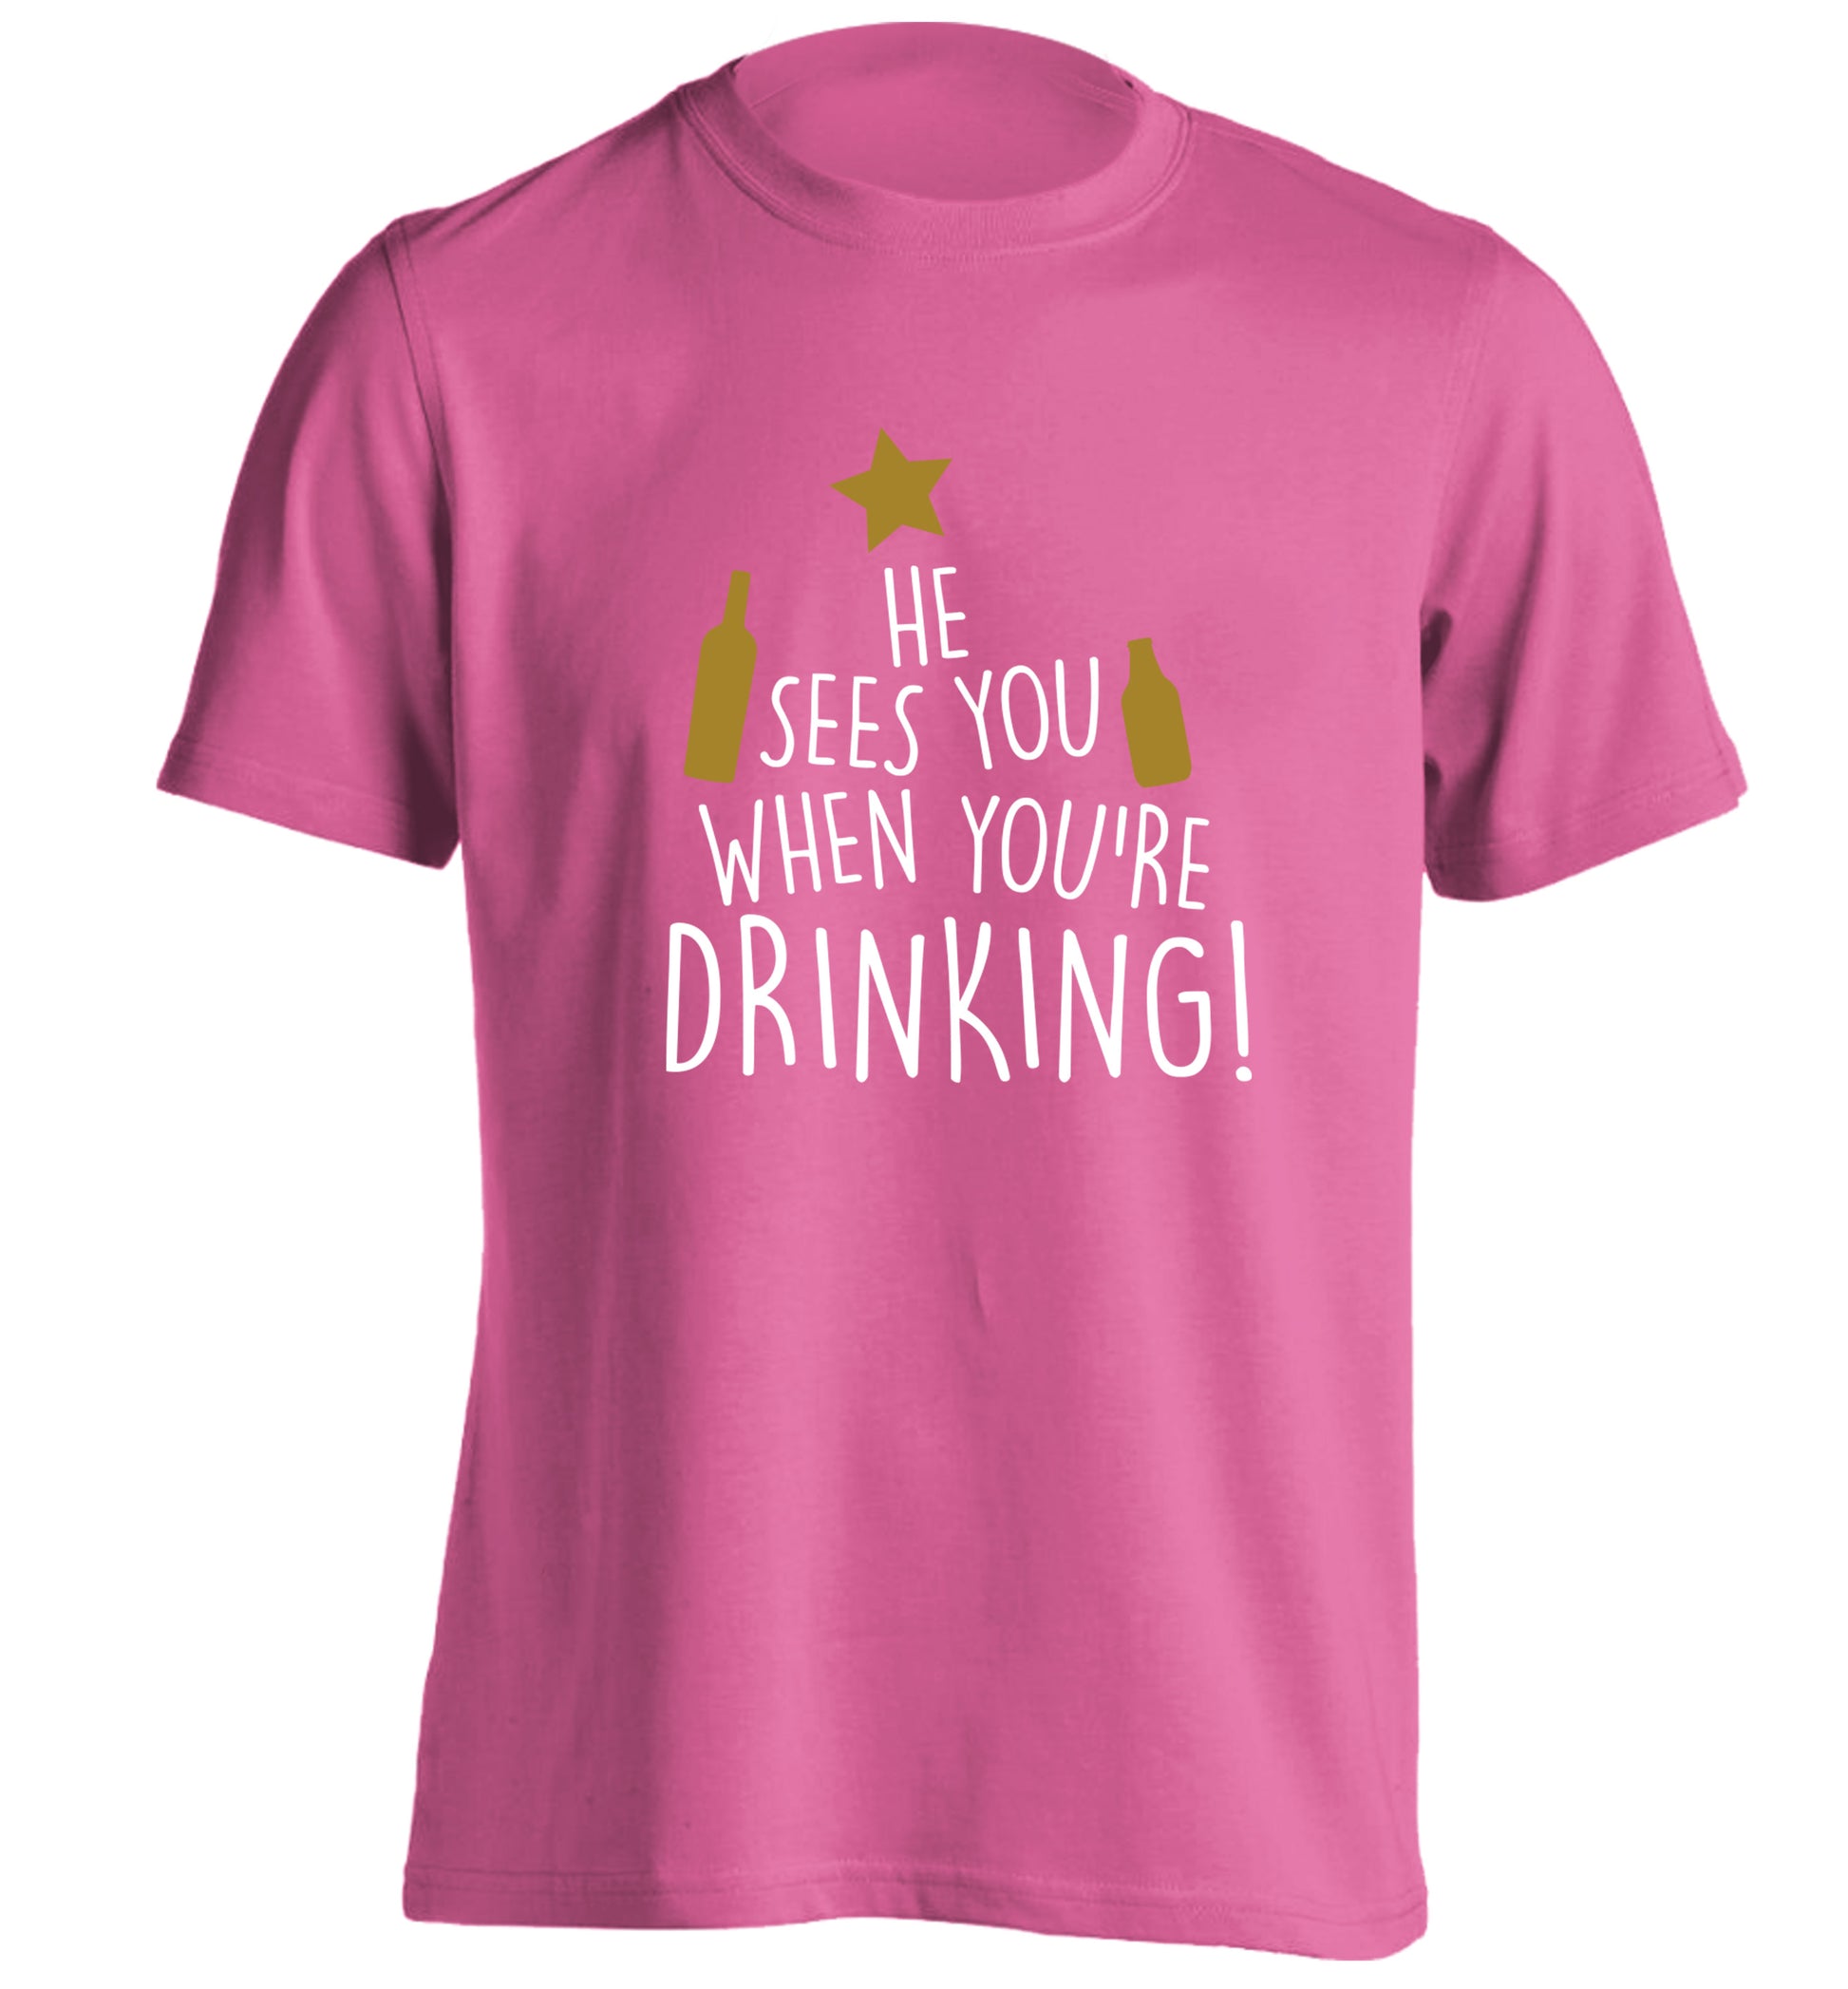 He sees you when you're drinking adults unisex pink Tshirt 2XL